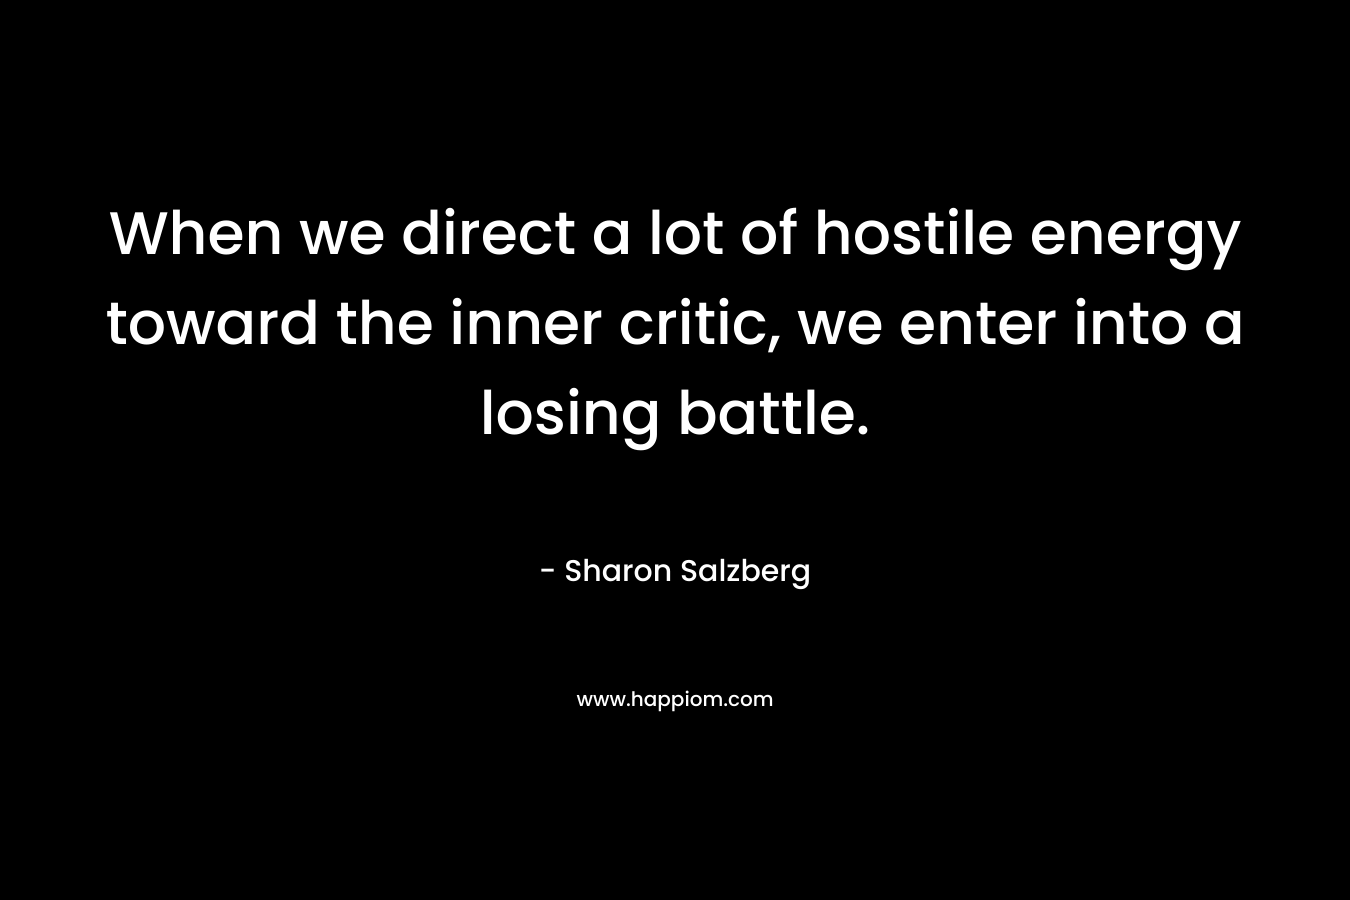 When we direct a lot of hostile energy toward the inner critic, we enter into a losing battle.